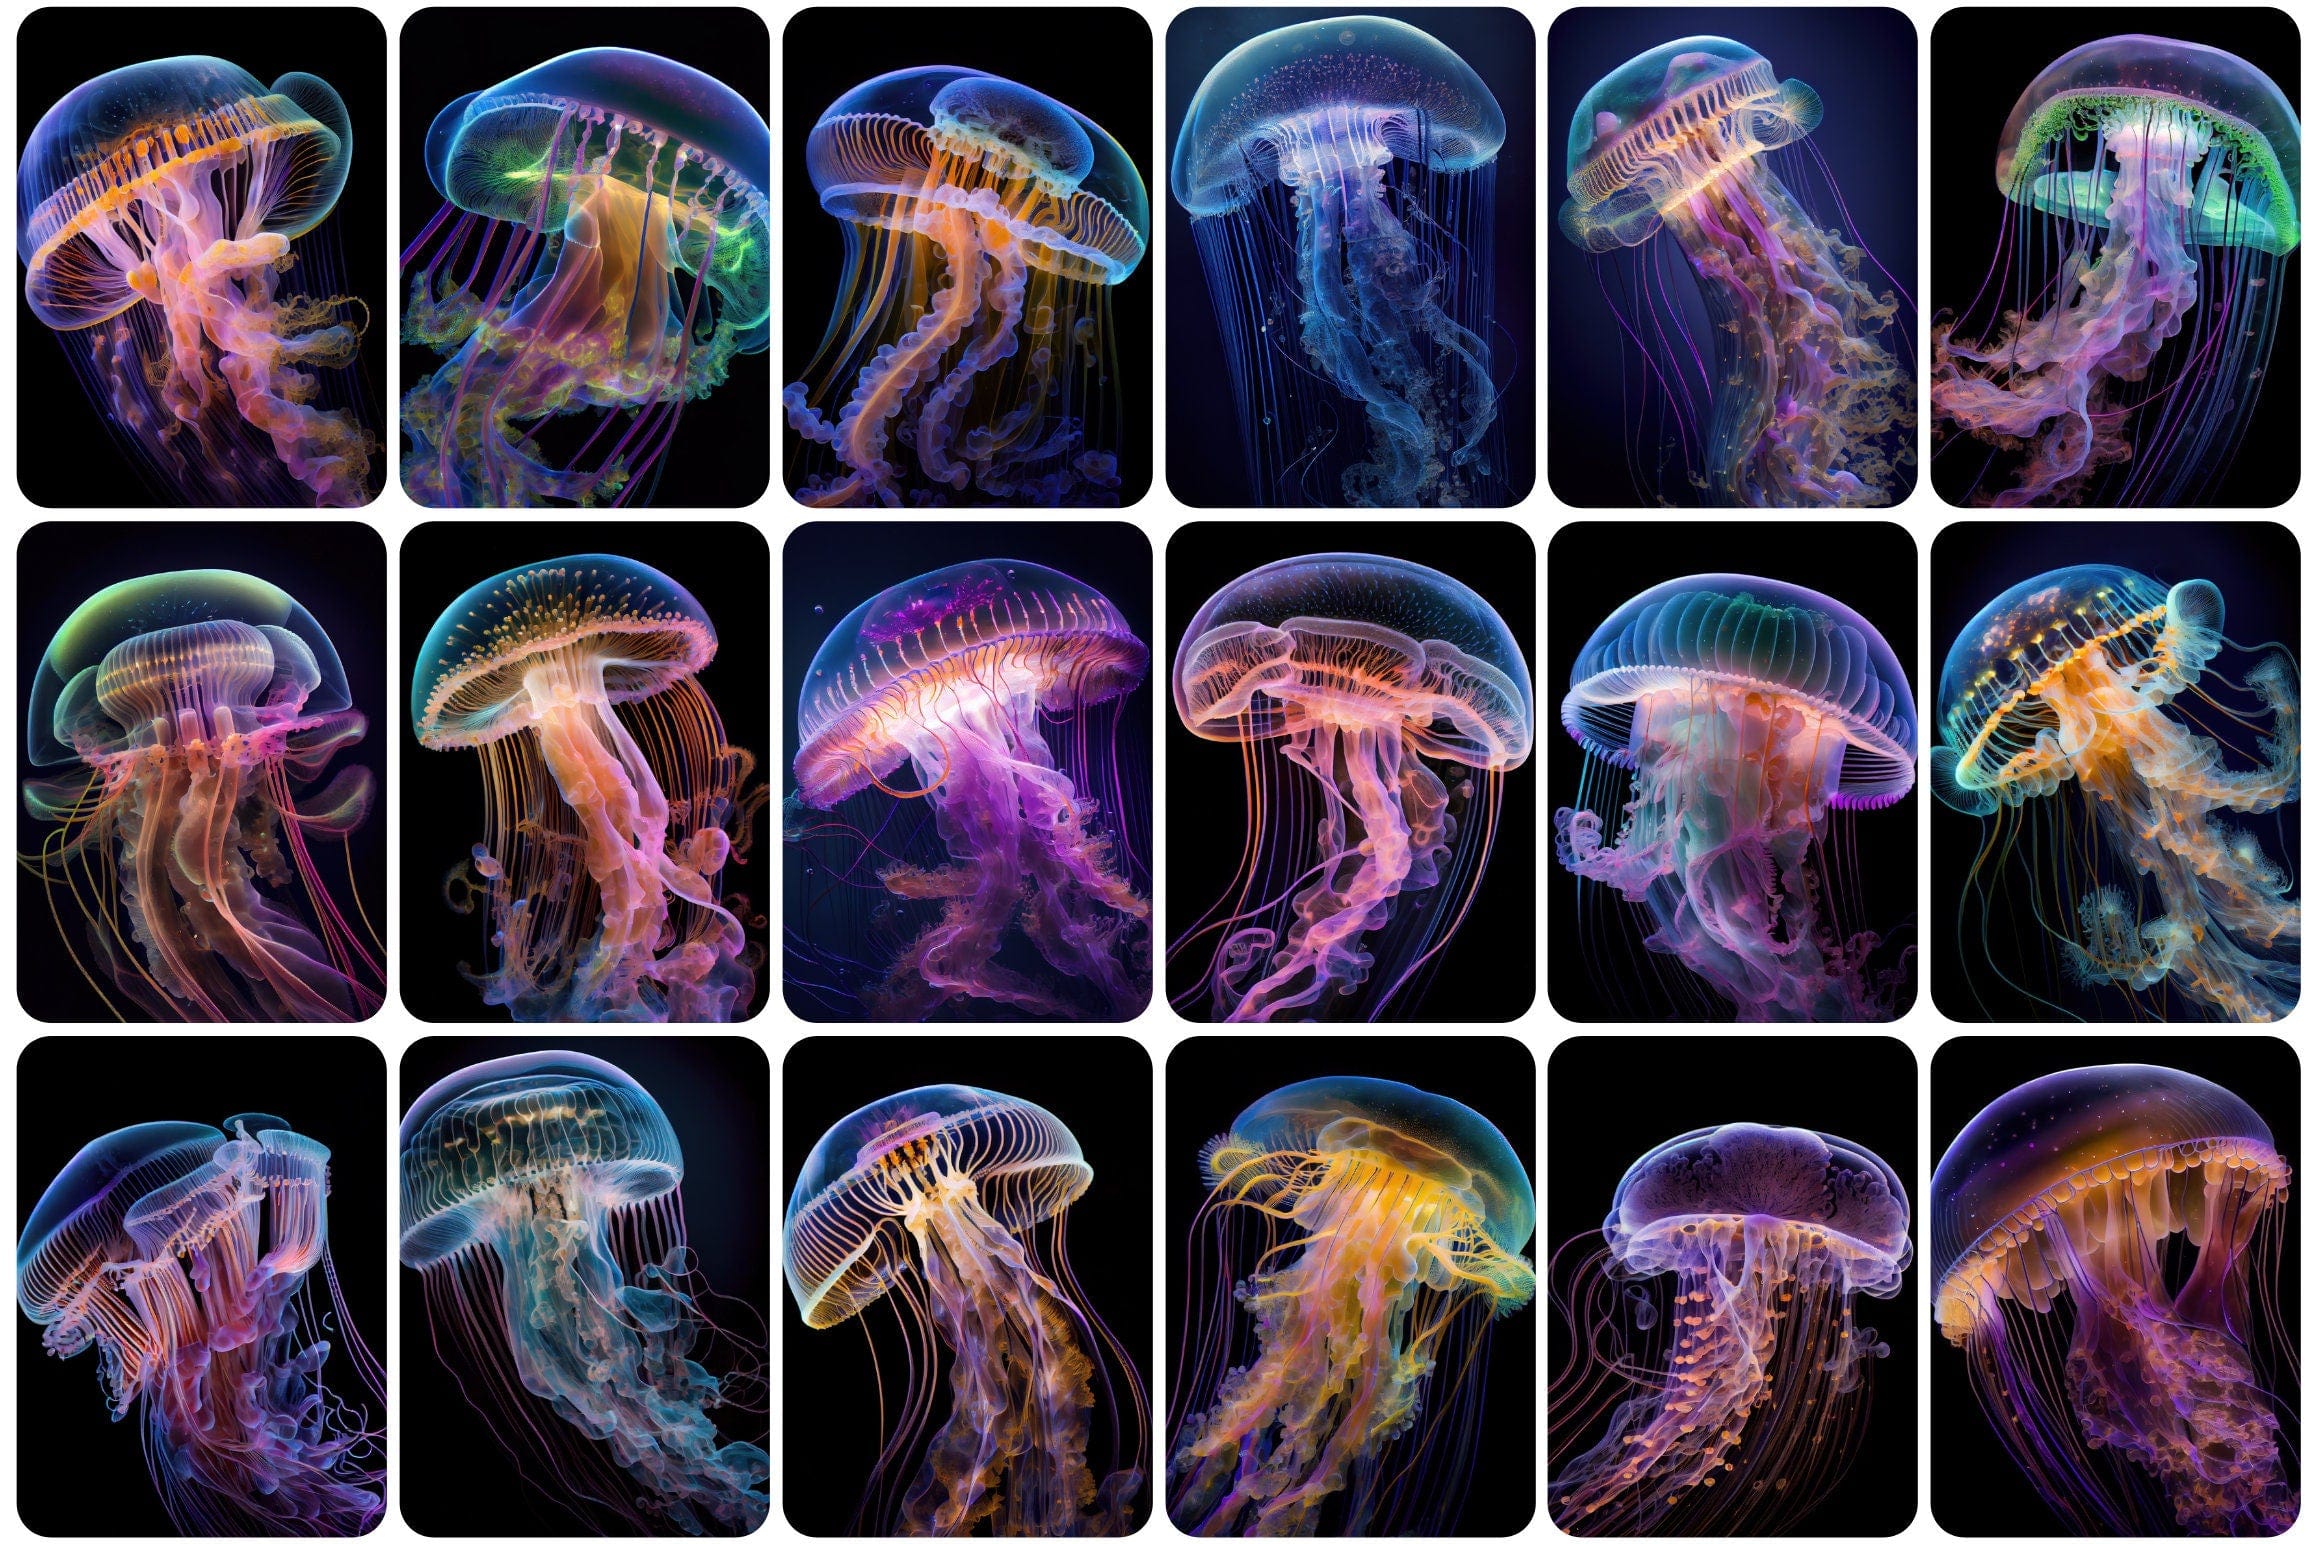 240 Glowing jellyfish images - Neon jellyfish printable posters - Glow Jellyfish Image Pack - Commercial License Digital Download Sumobundle